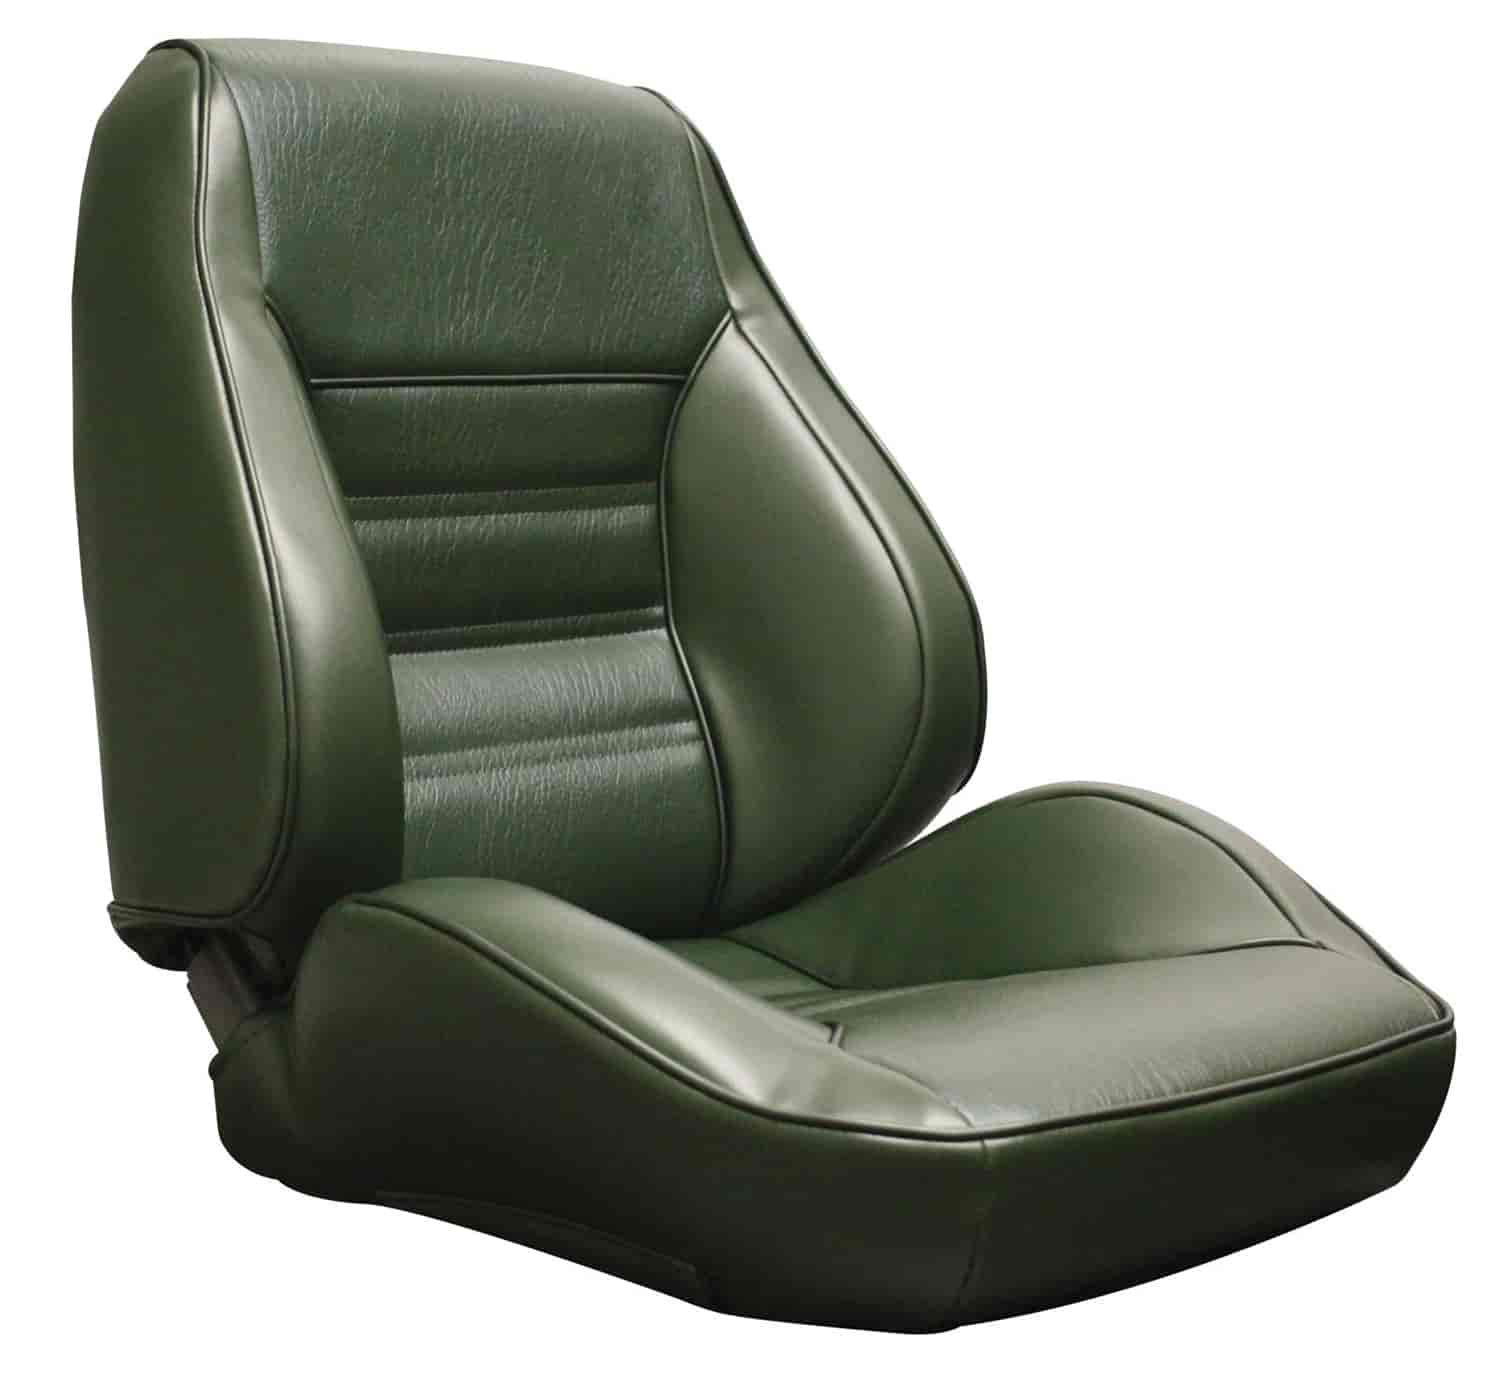 1970 Ford Mustang Standard Interior Black Touring II Preassembled Reclining Front Bucket Seats